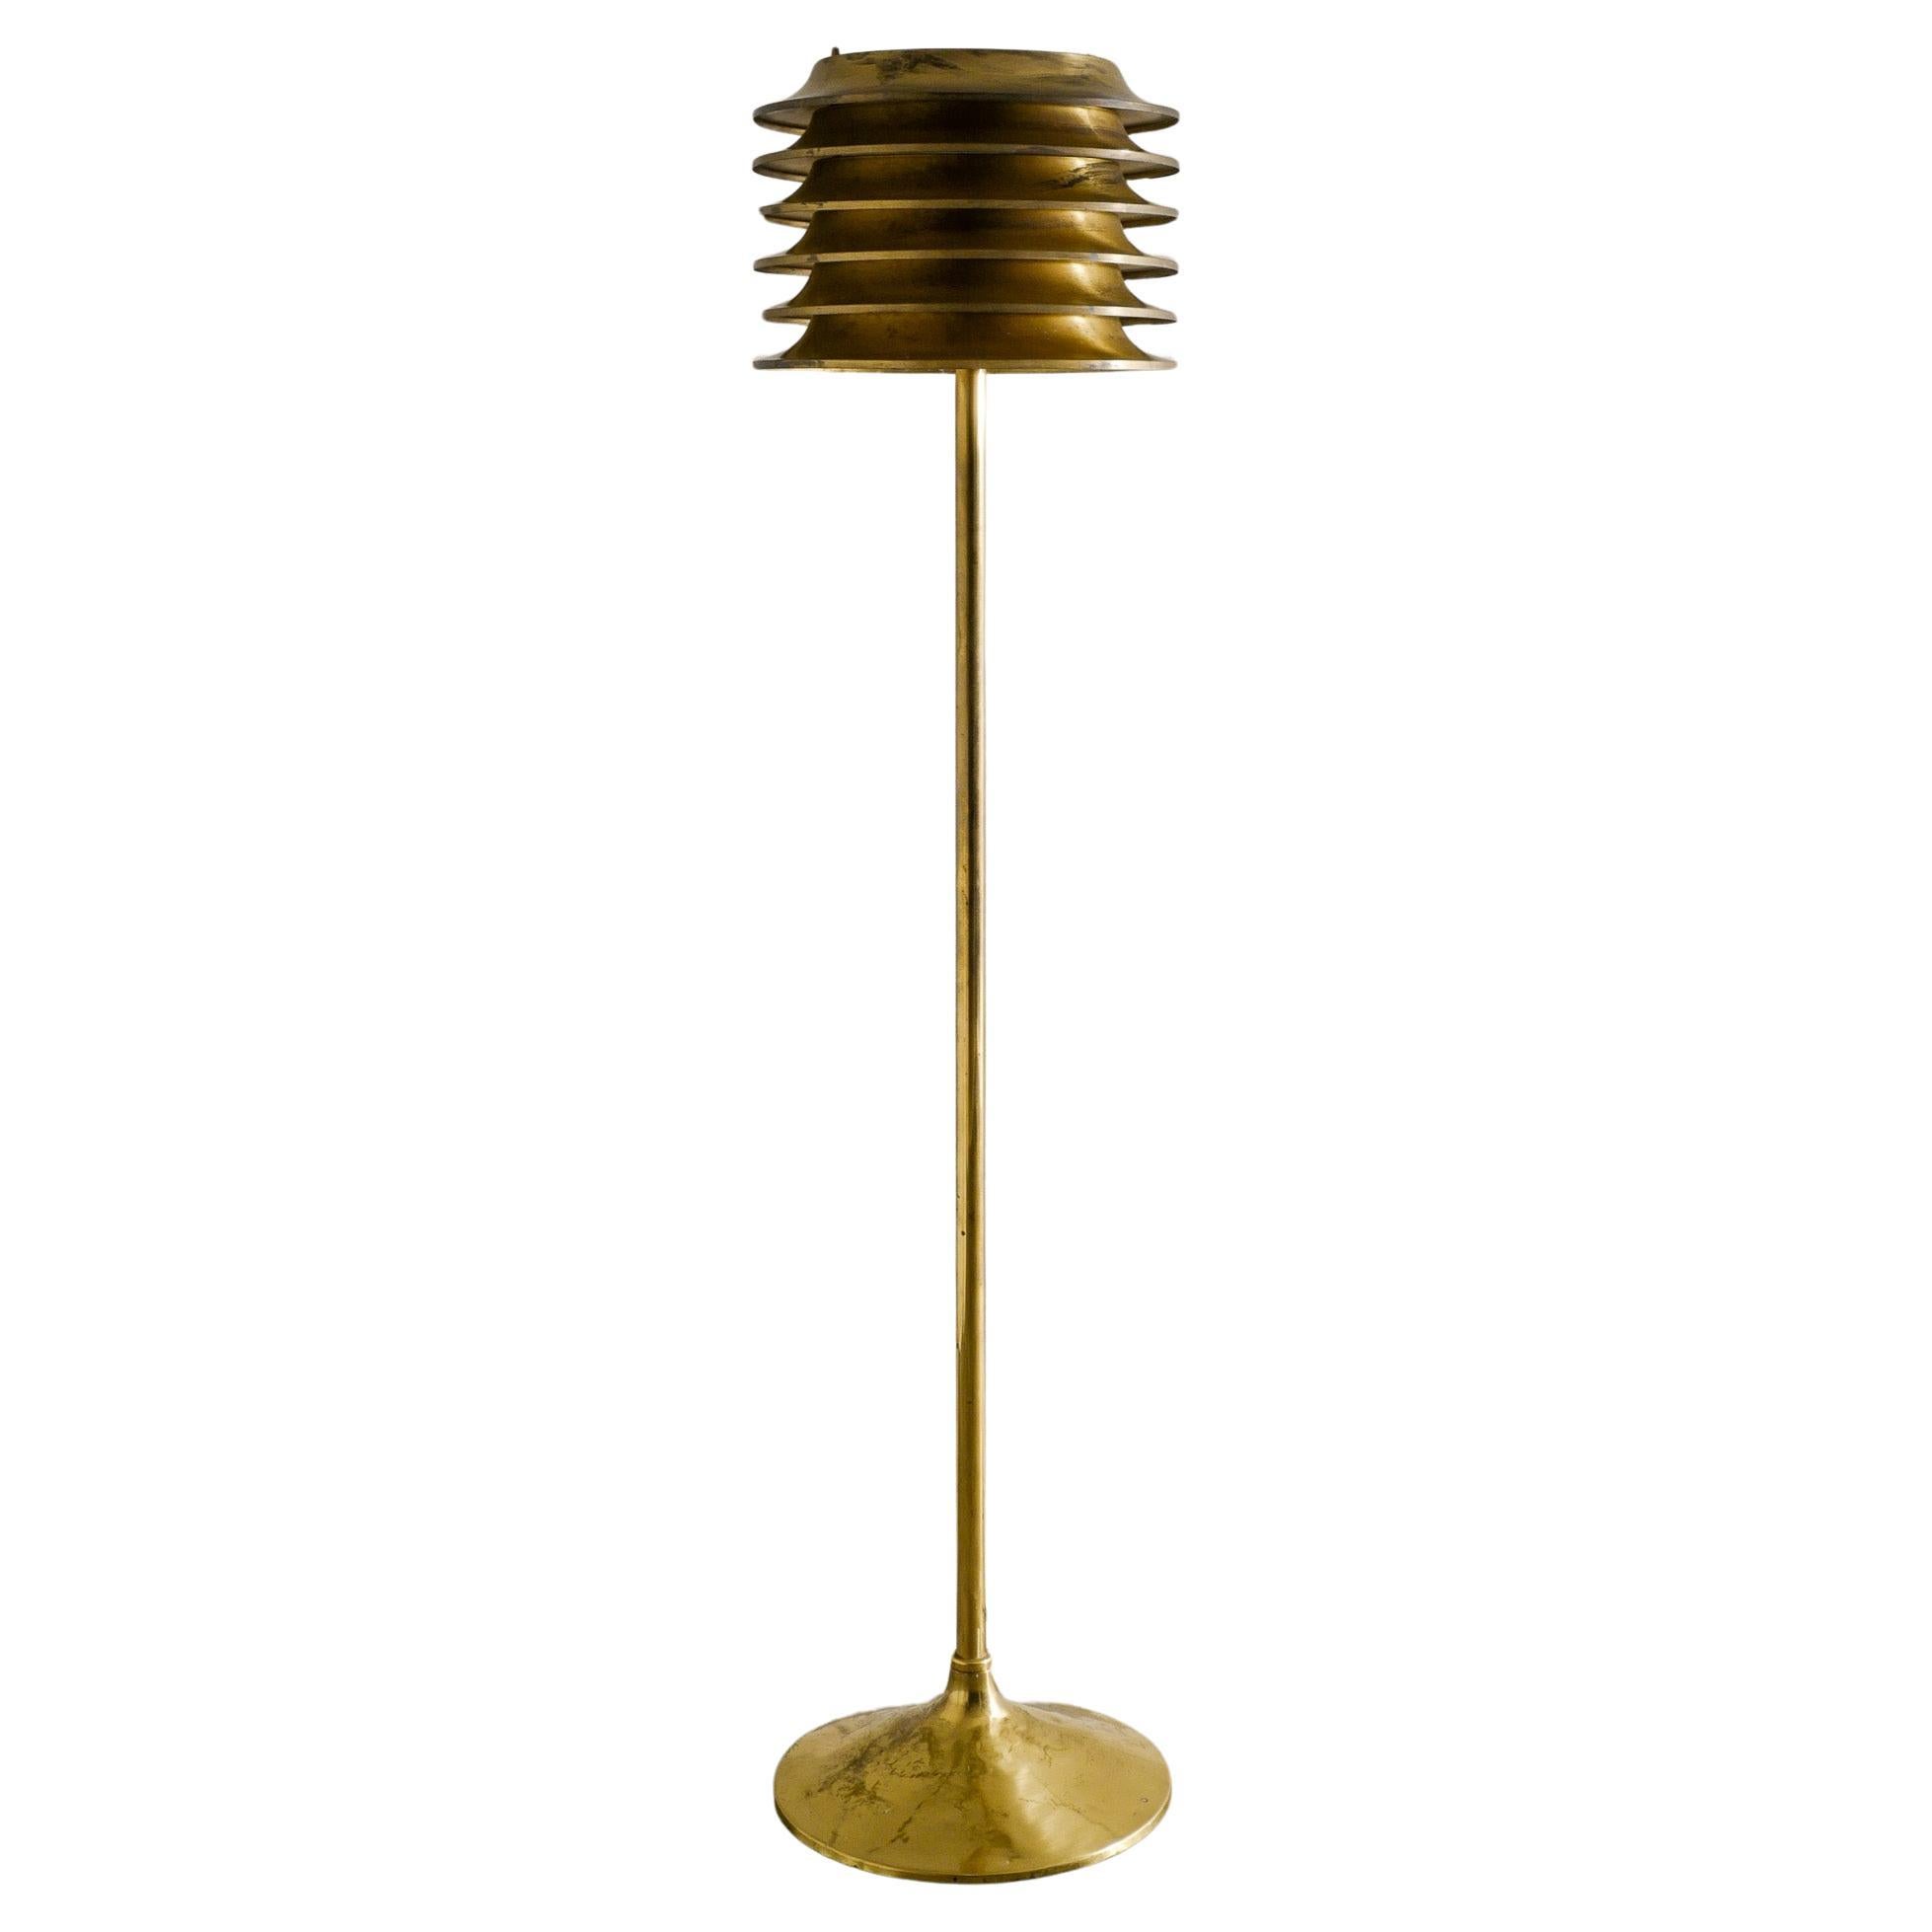  Mid Century Floor Lamp in Brass by Kai Ruokonen Produced by Orno Finland, 1970s